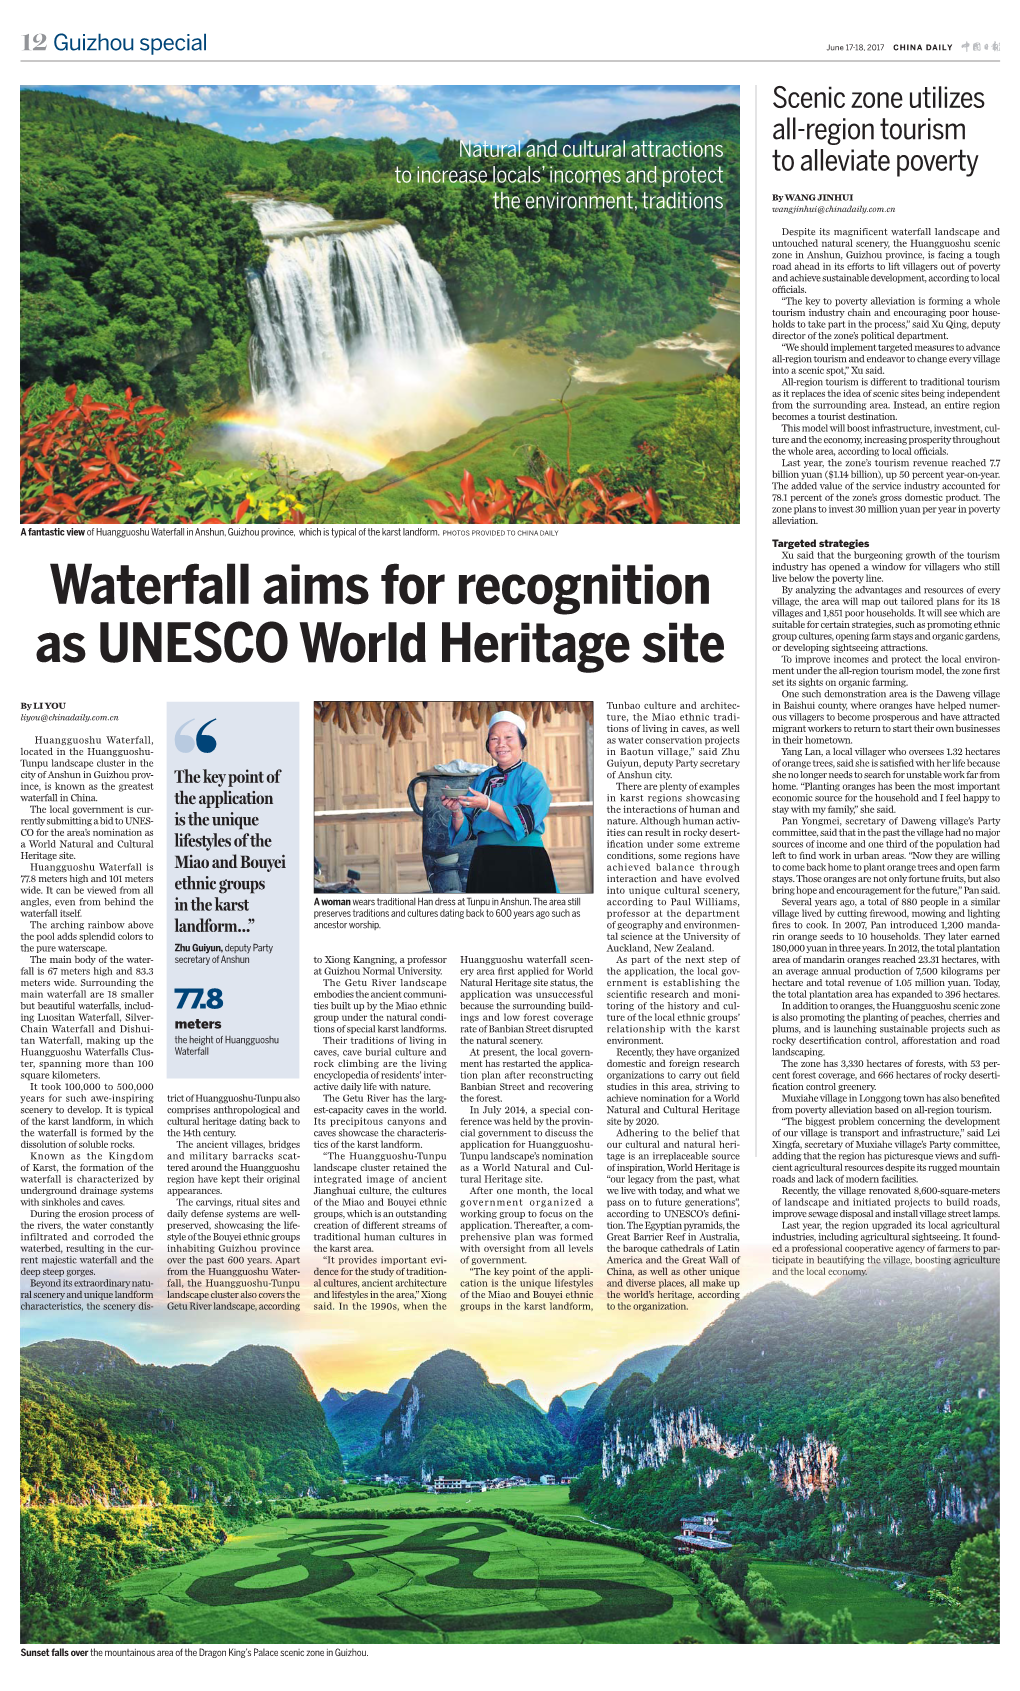 Waterfall Aims for Recognition As UNESCO World Heritage Site